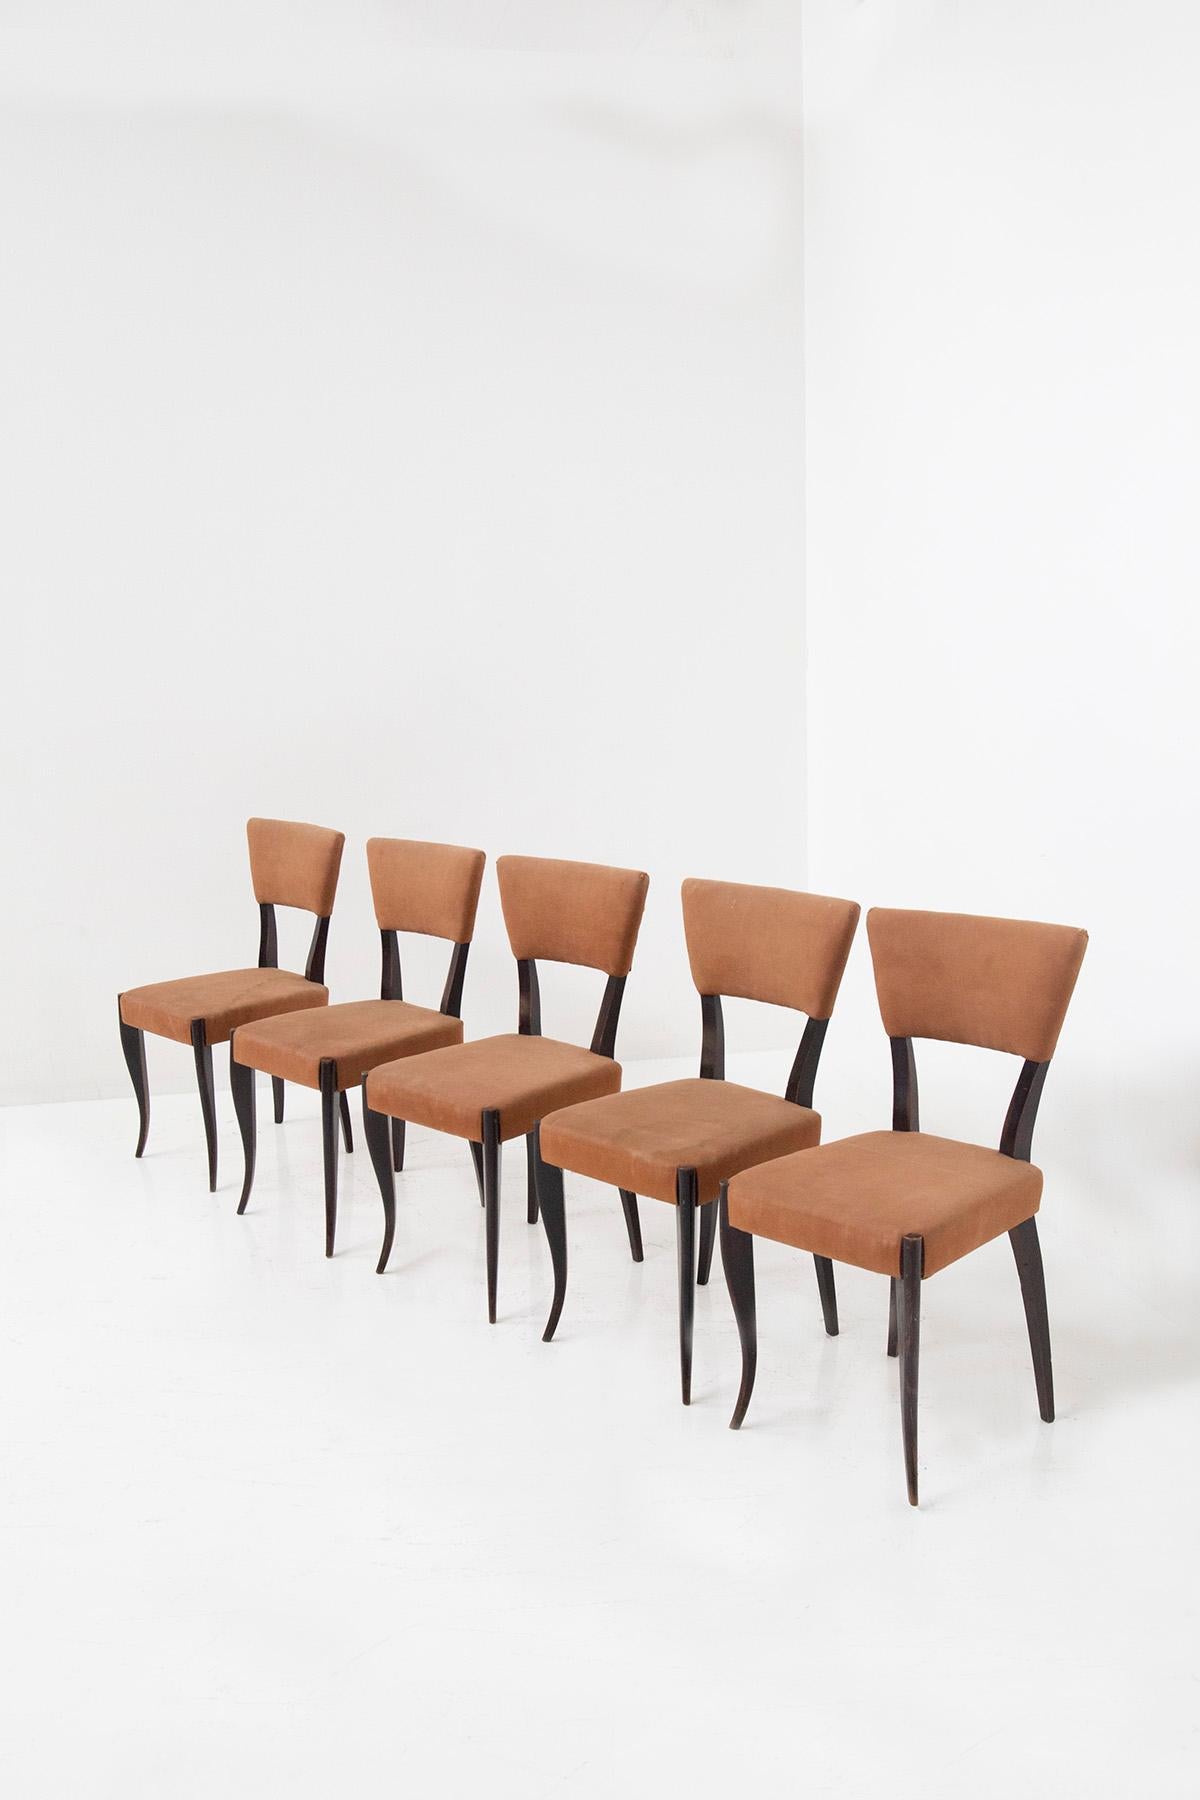 Step into a world of vintage allure with our extraordinary Set of Five Vintage Italian Chairs from the 1950s. Each chair is a captivating piece of history, meticulously crafted to embody the essence of mid-century Italian design.

The rich, dark